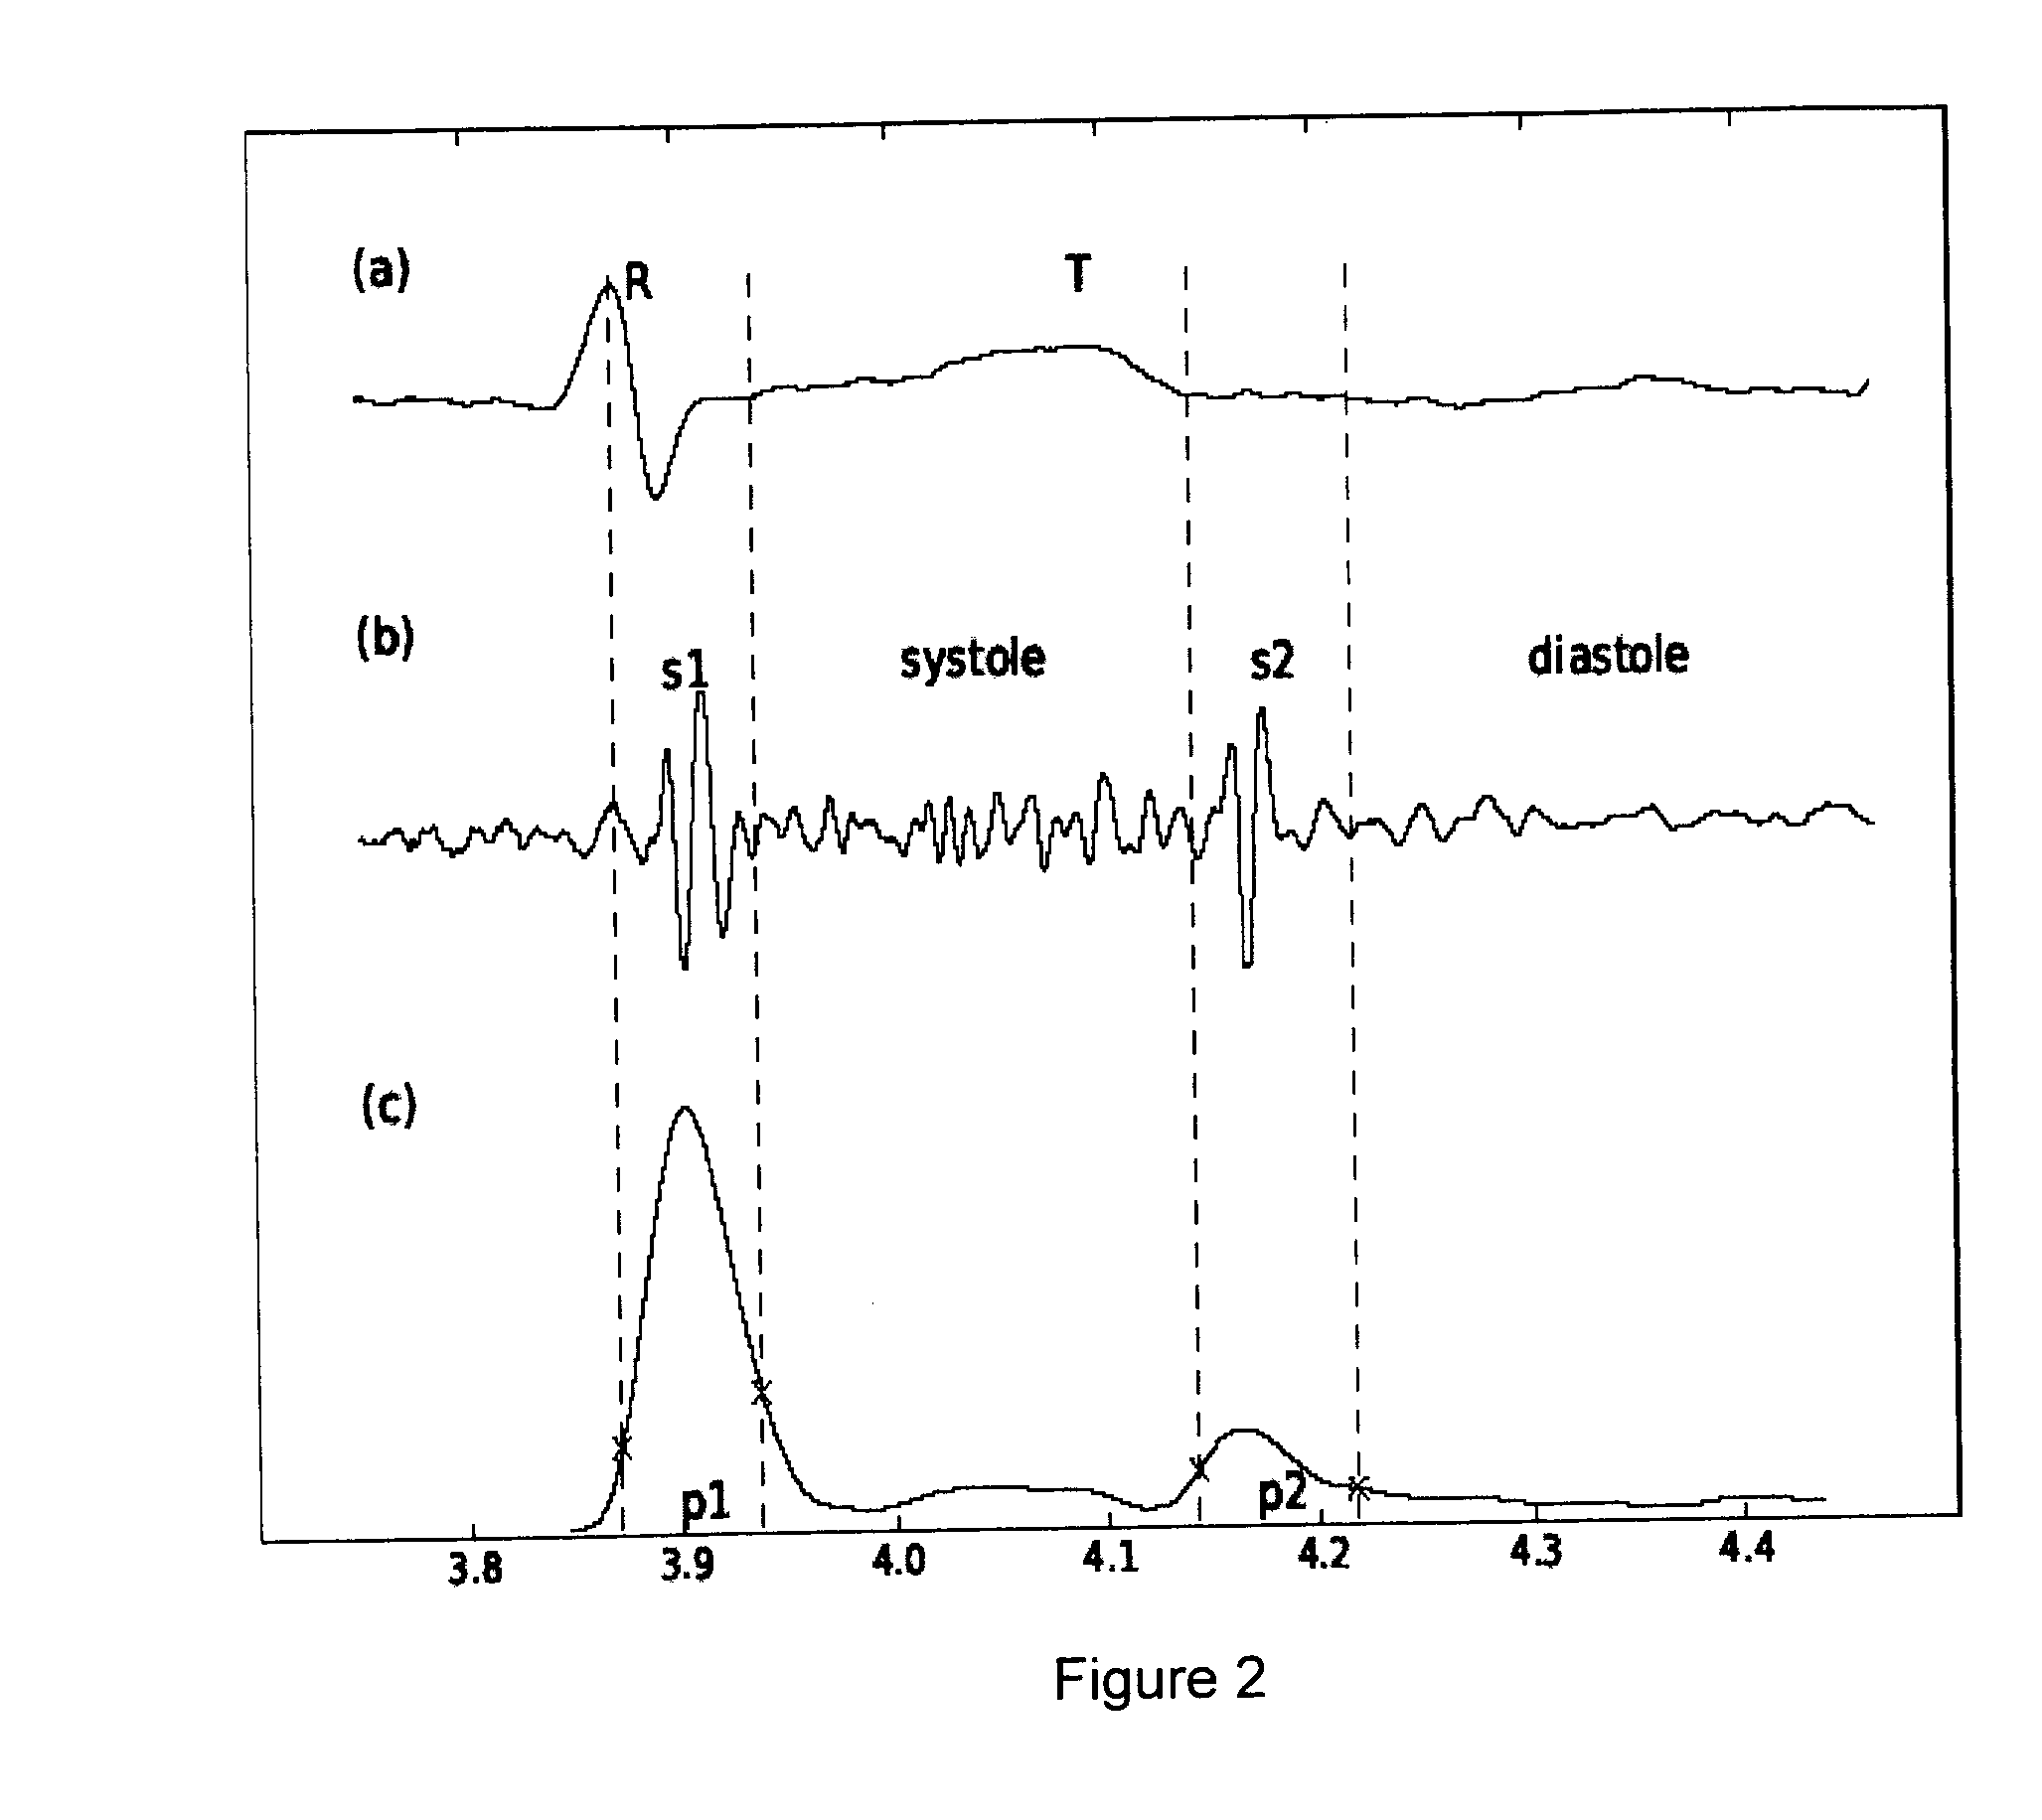 System and method for classifying a heart sound